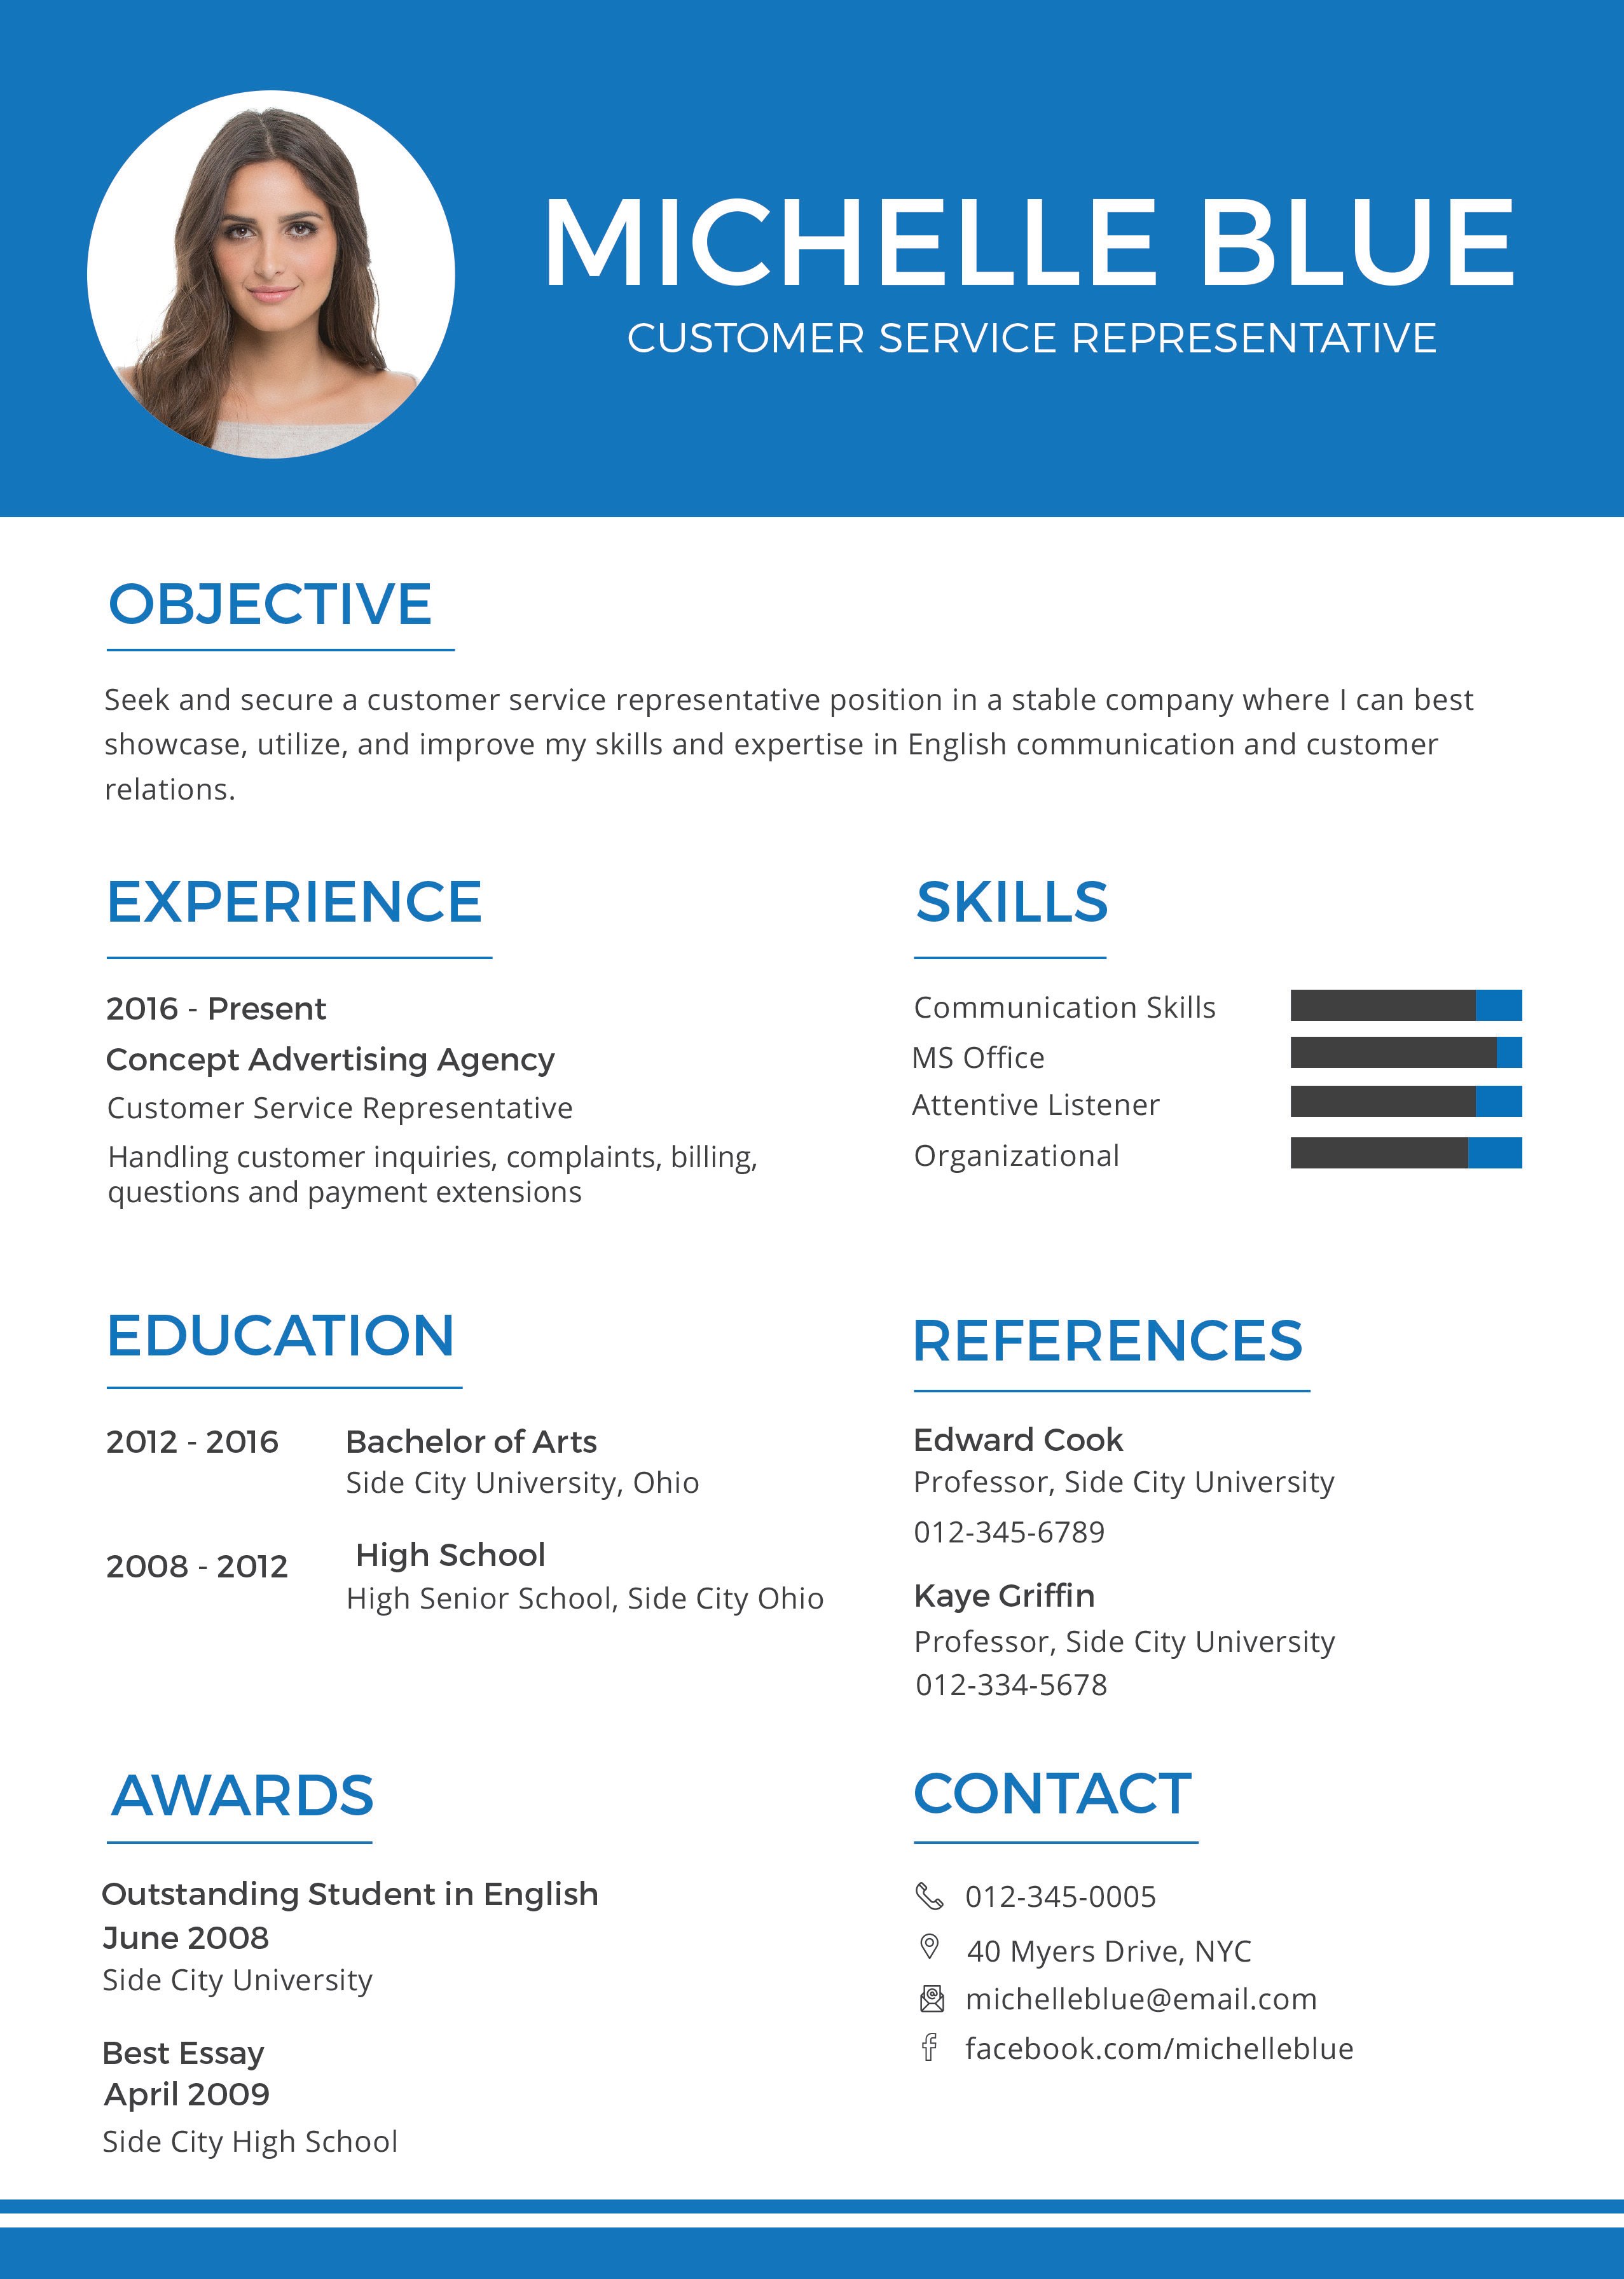 Free Customer Service Representative Resume and CV Template in PSD, MS Word, Publisher